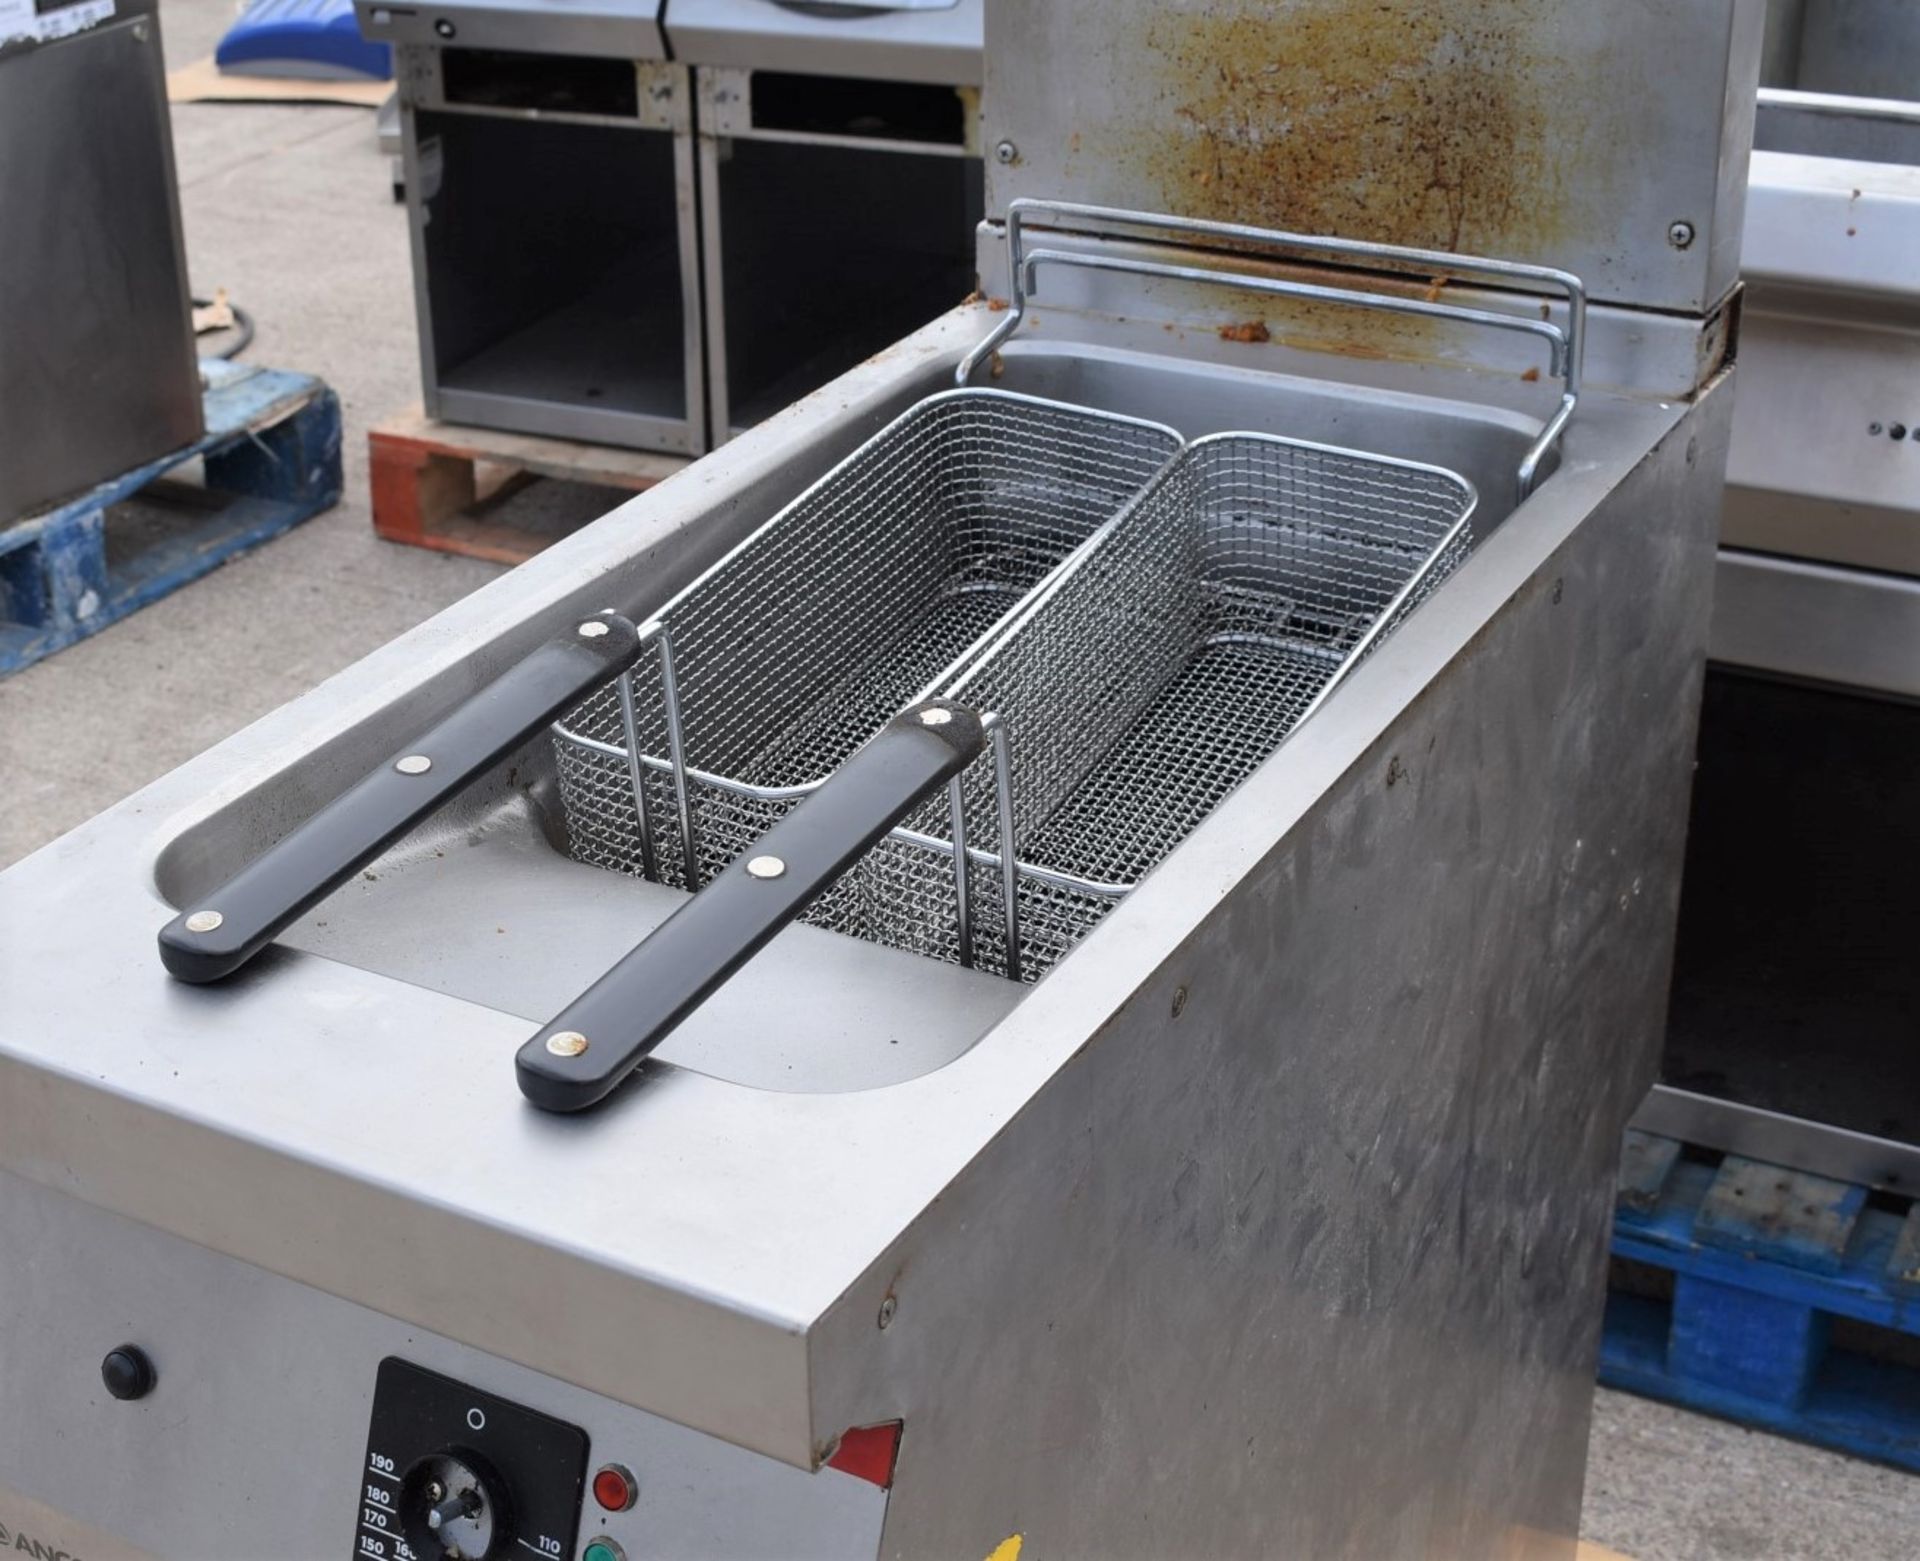 1 x Angelo Po Single Tank Gas Fryer With Baskets - AISI 304 Stainless Steel Finish - Latest Design - Image 4 of 5